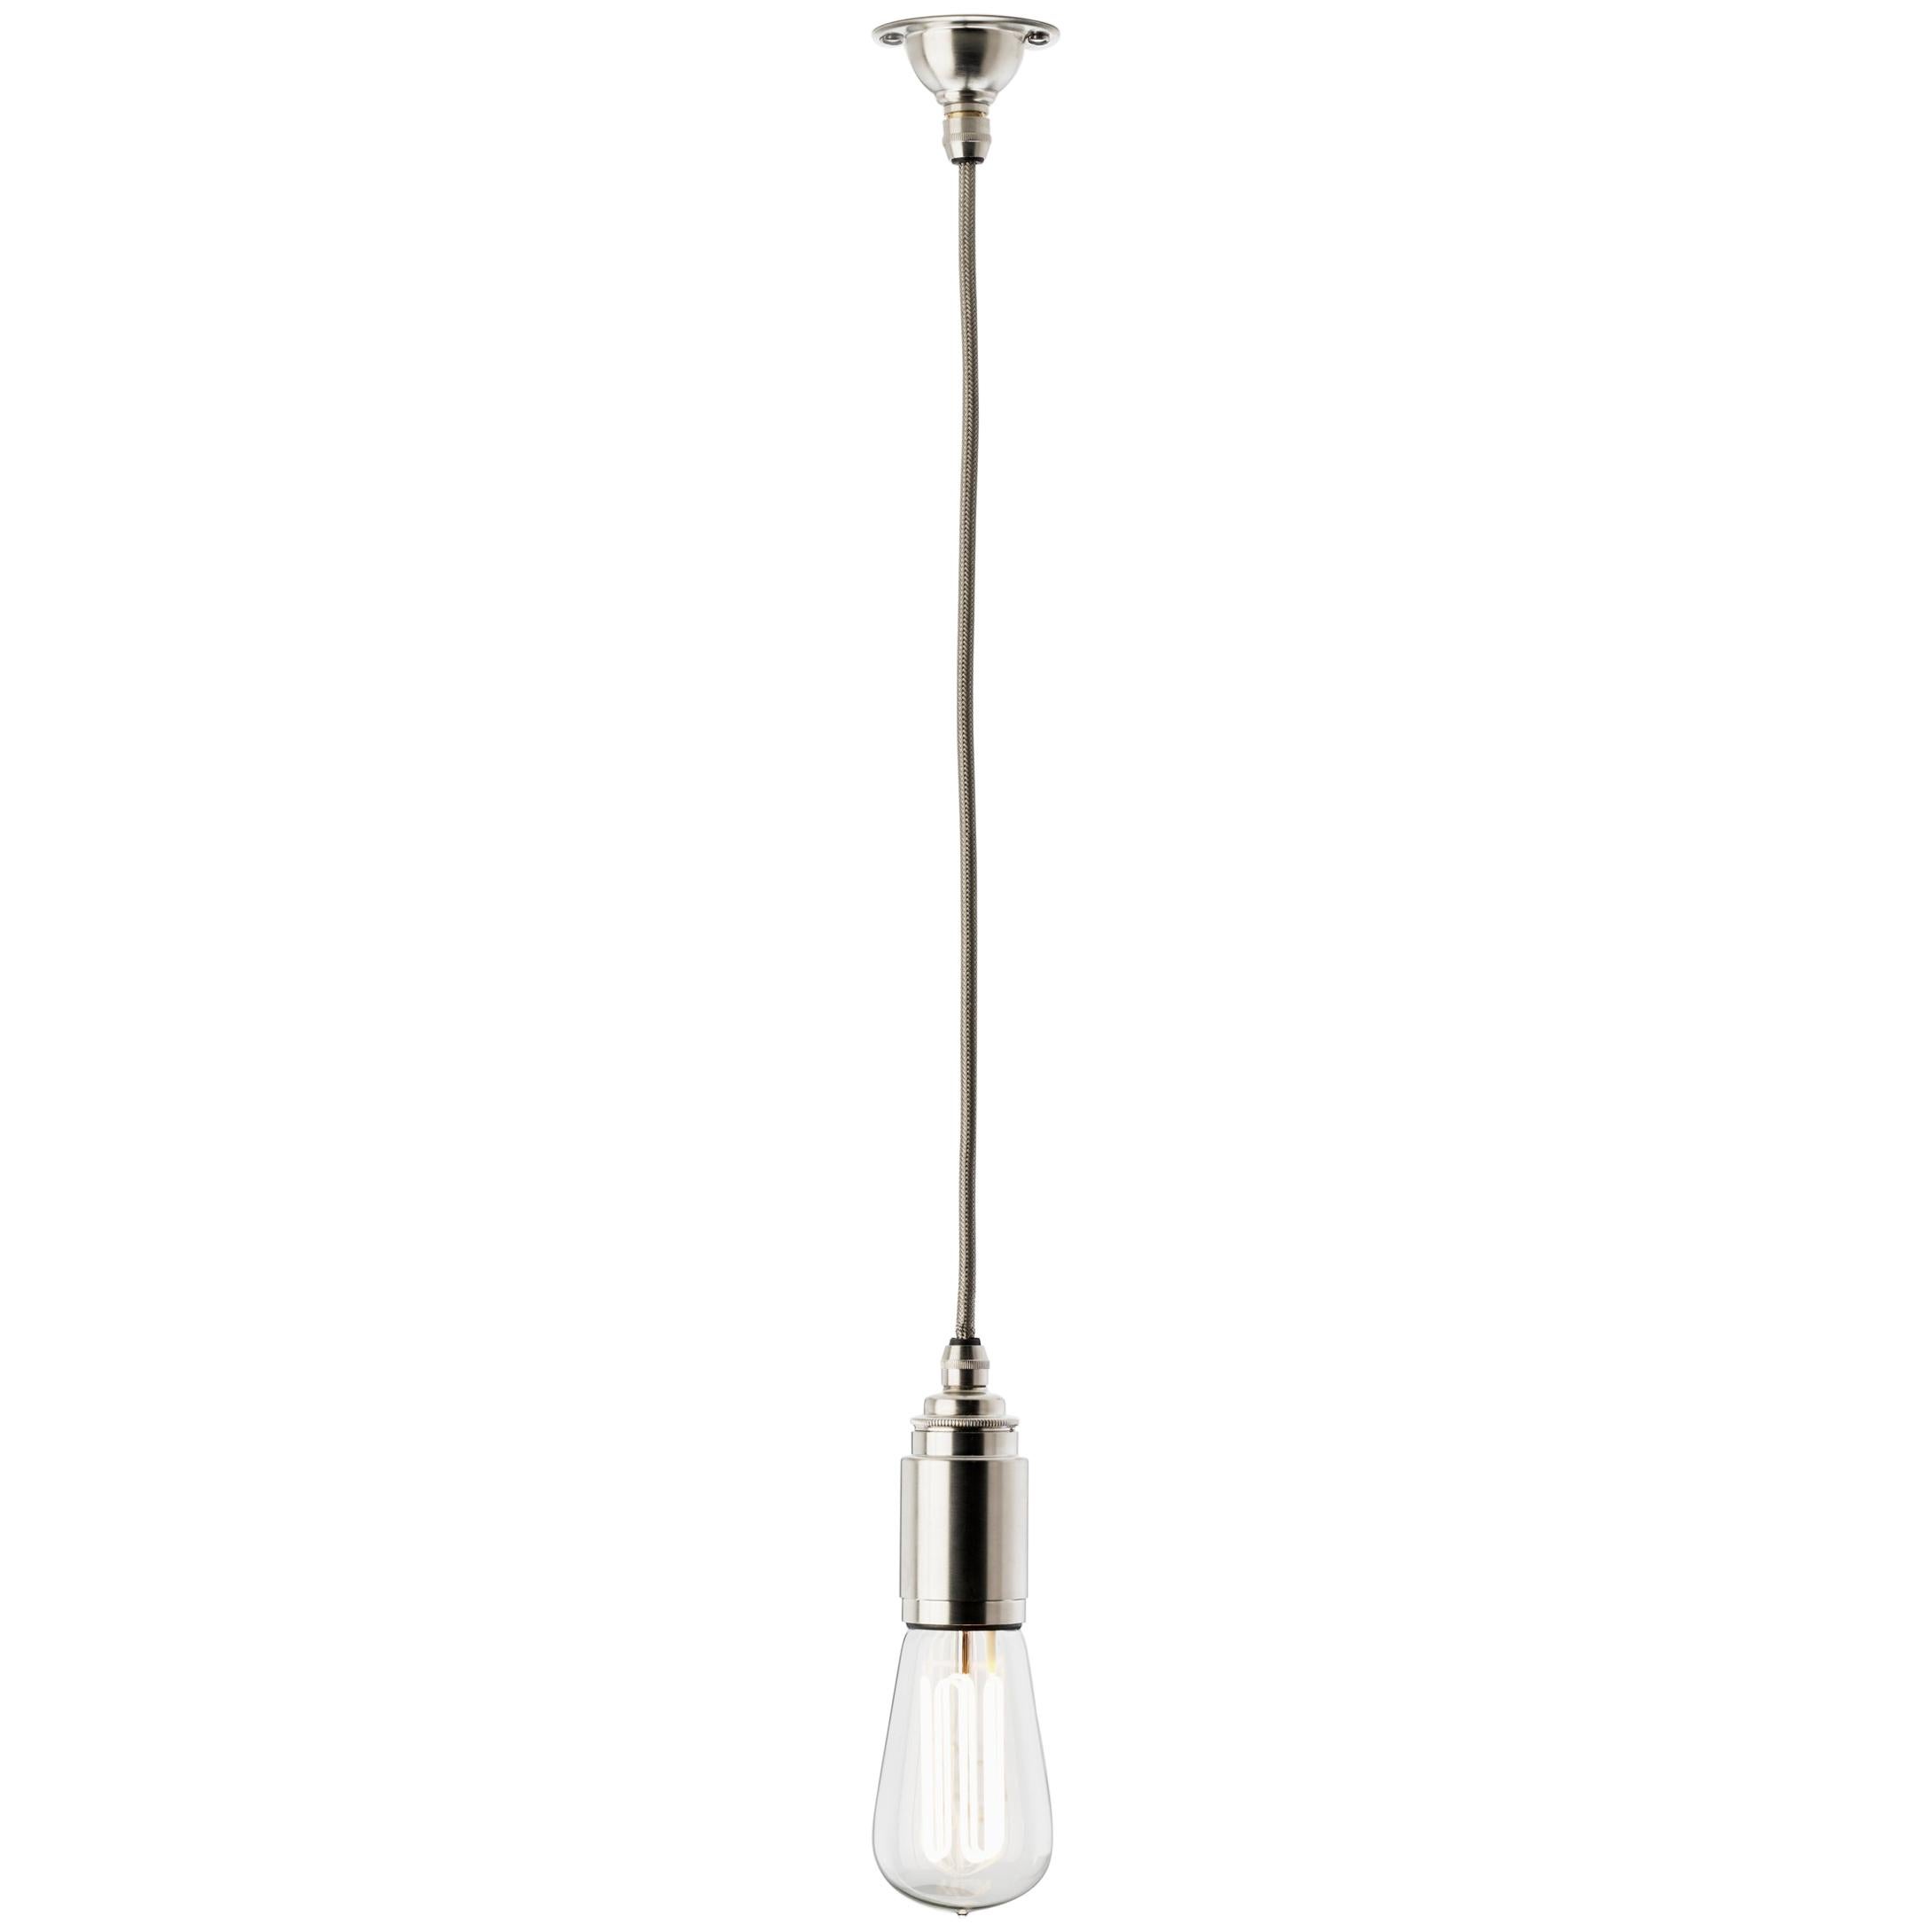 Tekna Thorn Pete Grip-C Pendant Light with Brushed Nickel Finish & Ceiling Plate For Sale